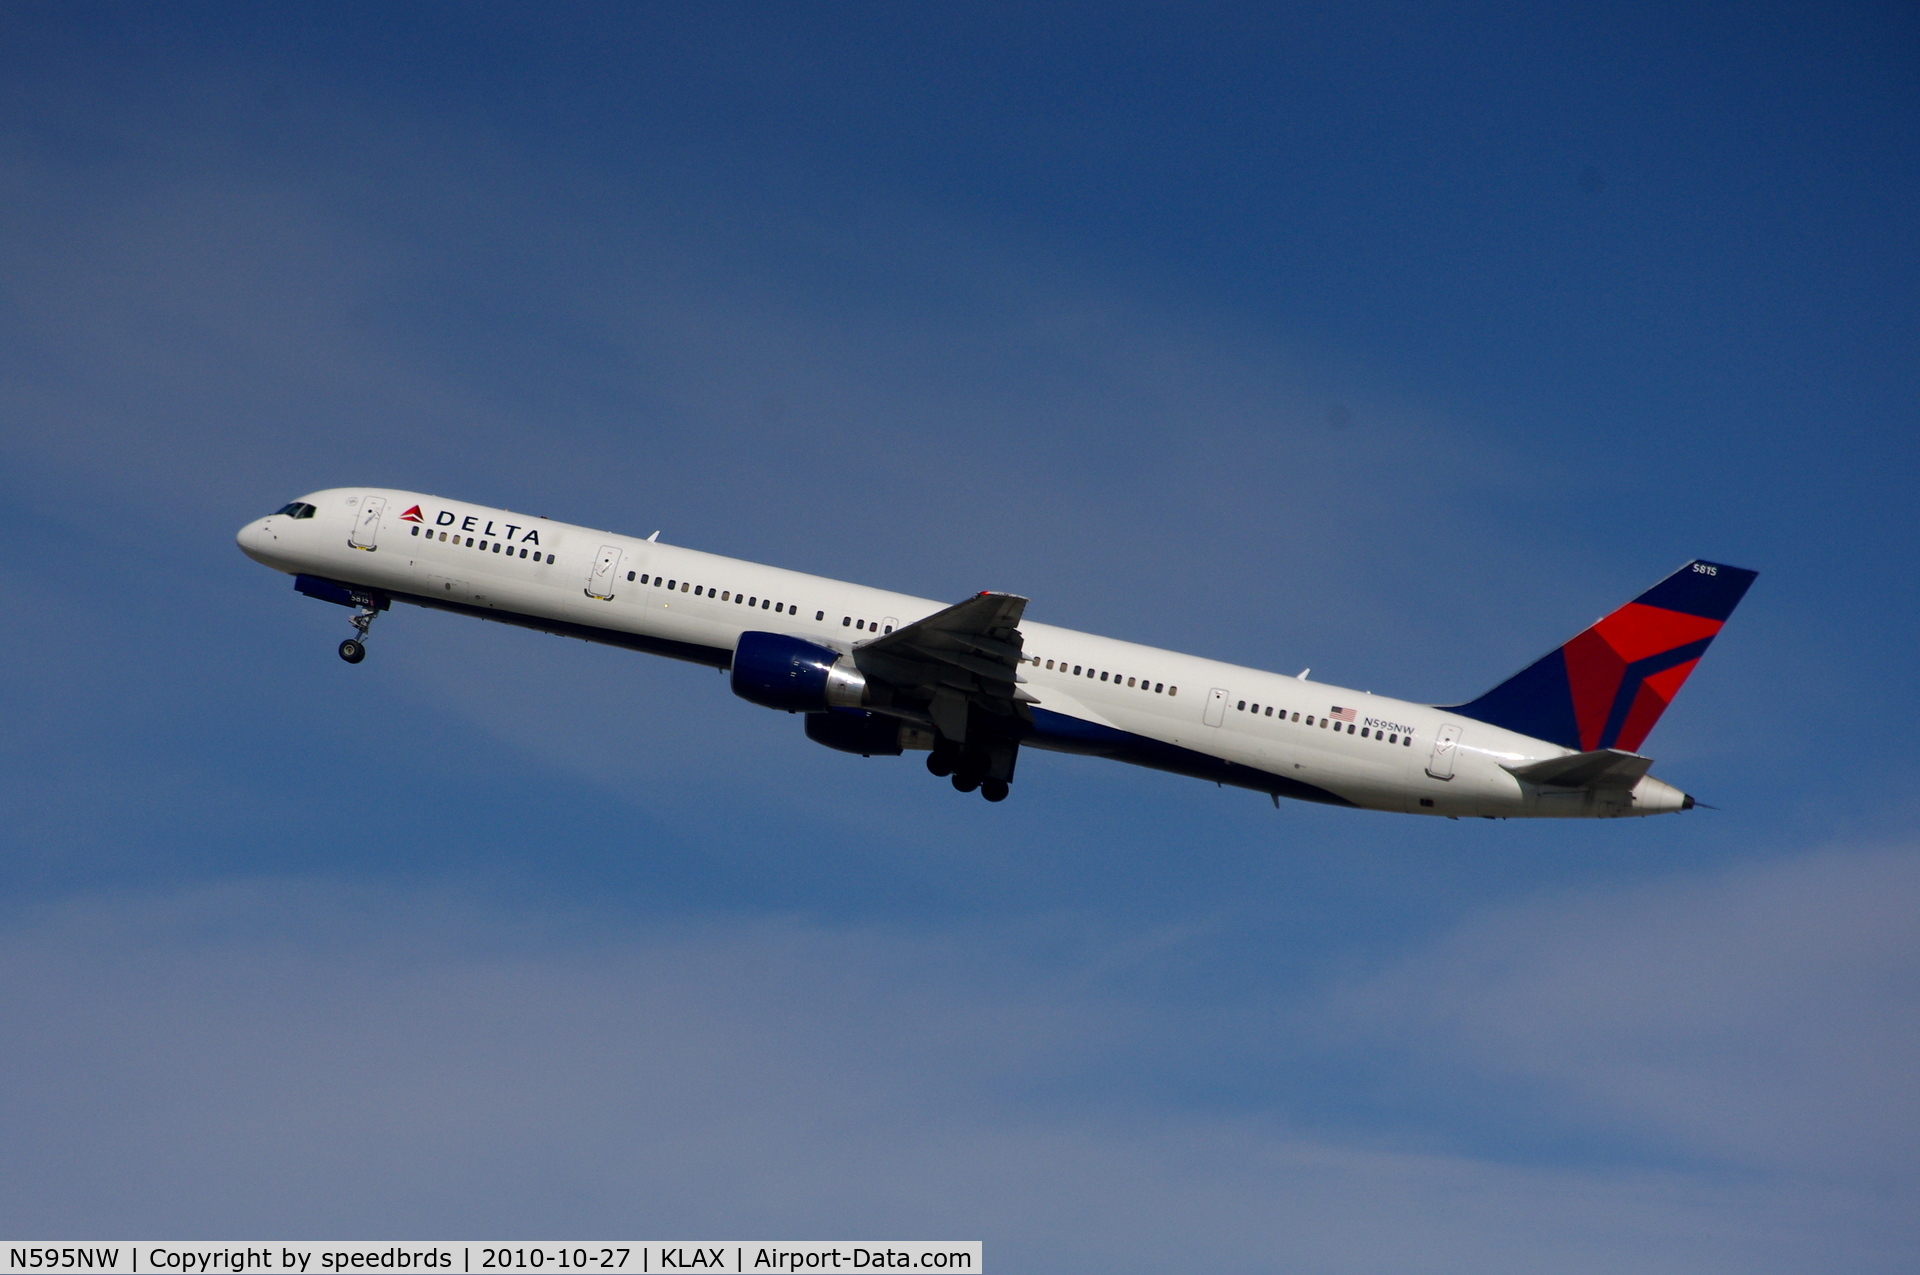 N595NW, 2003 Boeing 757-351 C/N 32995, Delta Air Lines.  Ex-Northwest Airlines 757-300 edition.